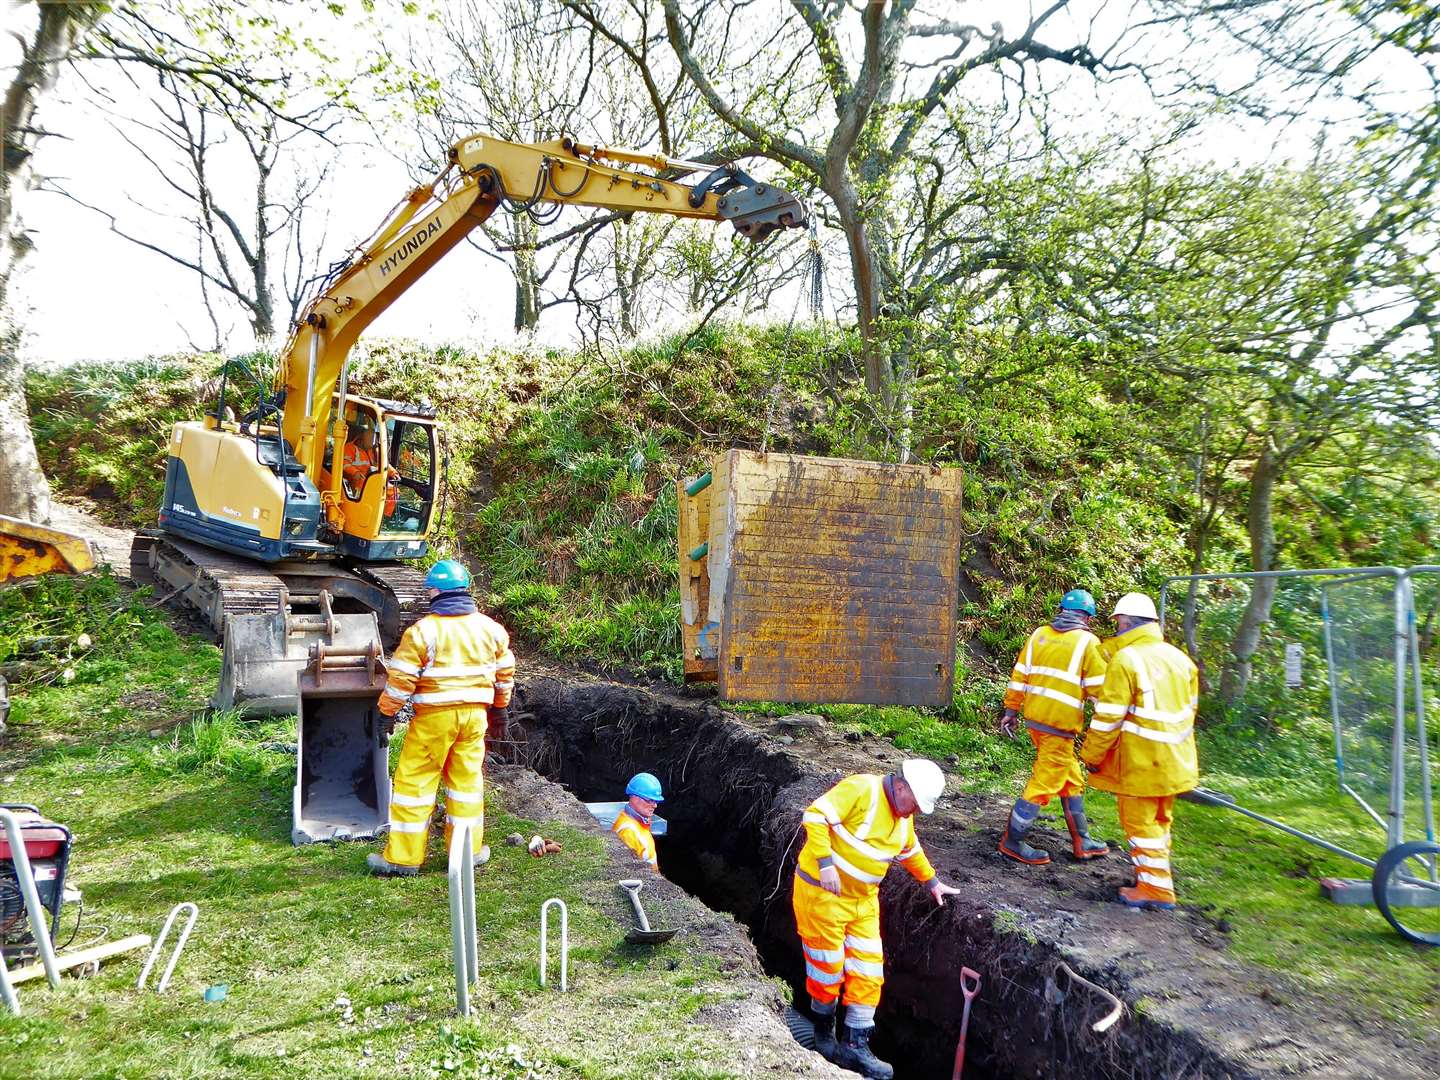 The decontamination pipe was laid down several weeks ago and the path restructured. Picture: DGS